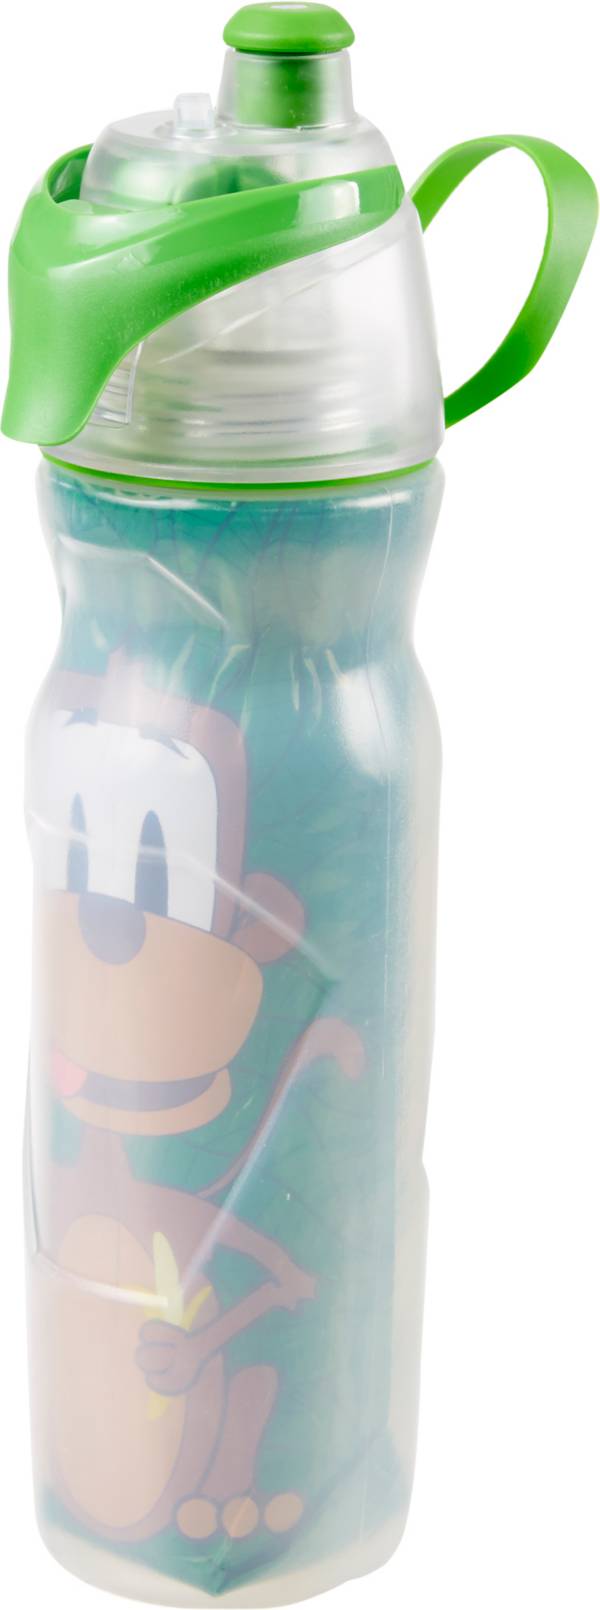 DICK'S Sporting Goods 20 oz. Misting Water Bottle product image